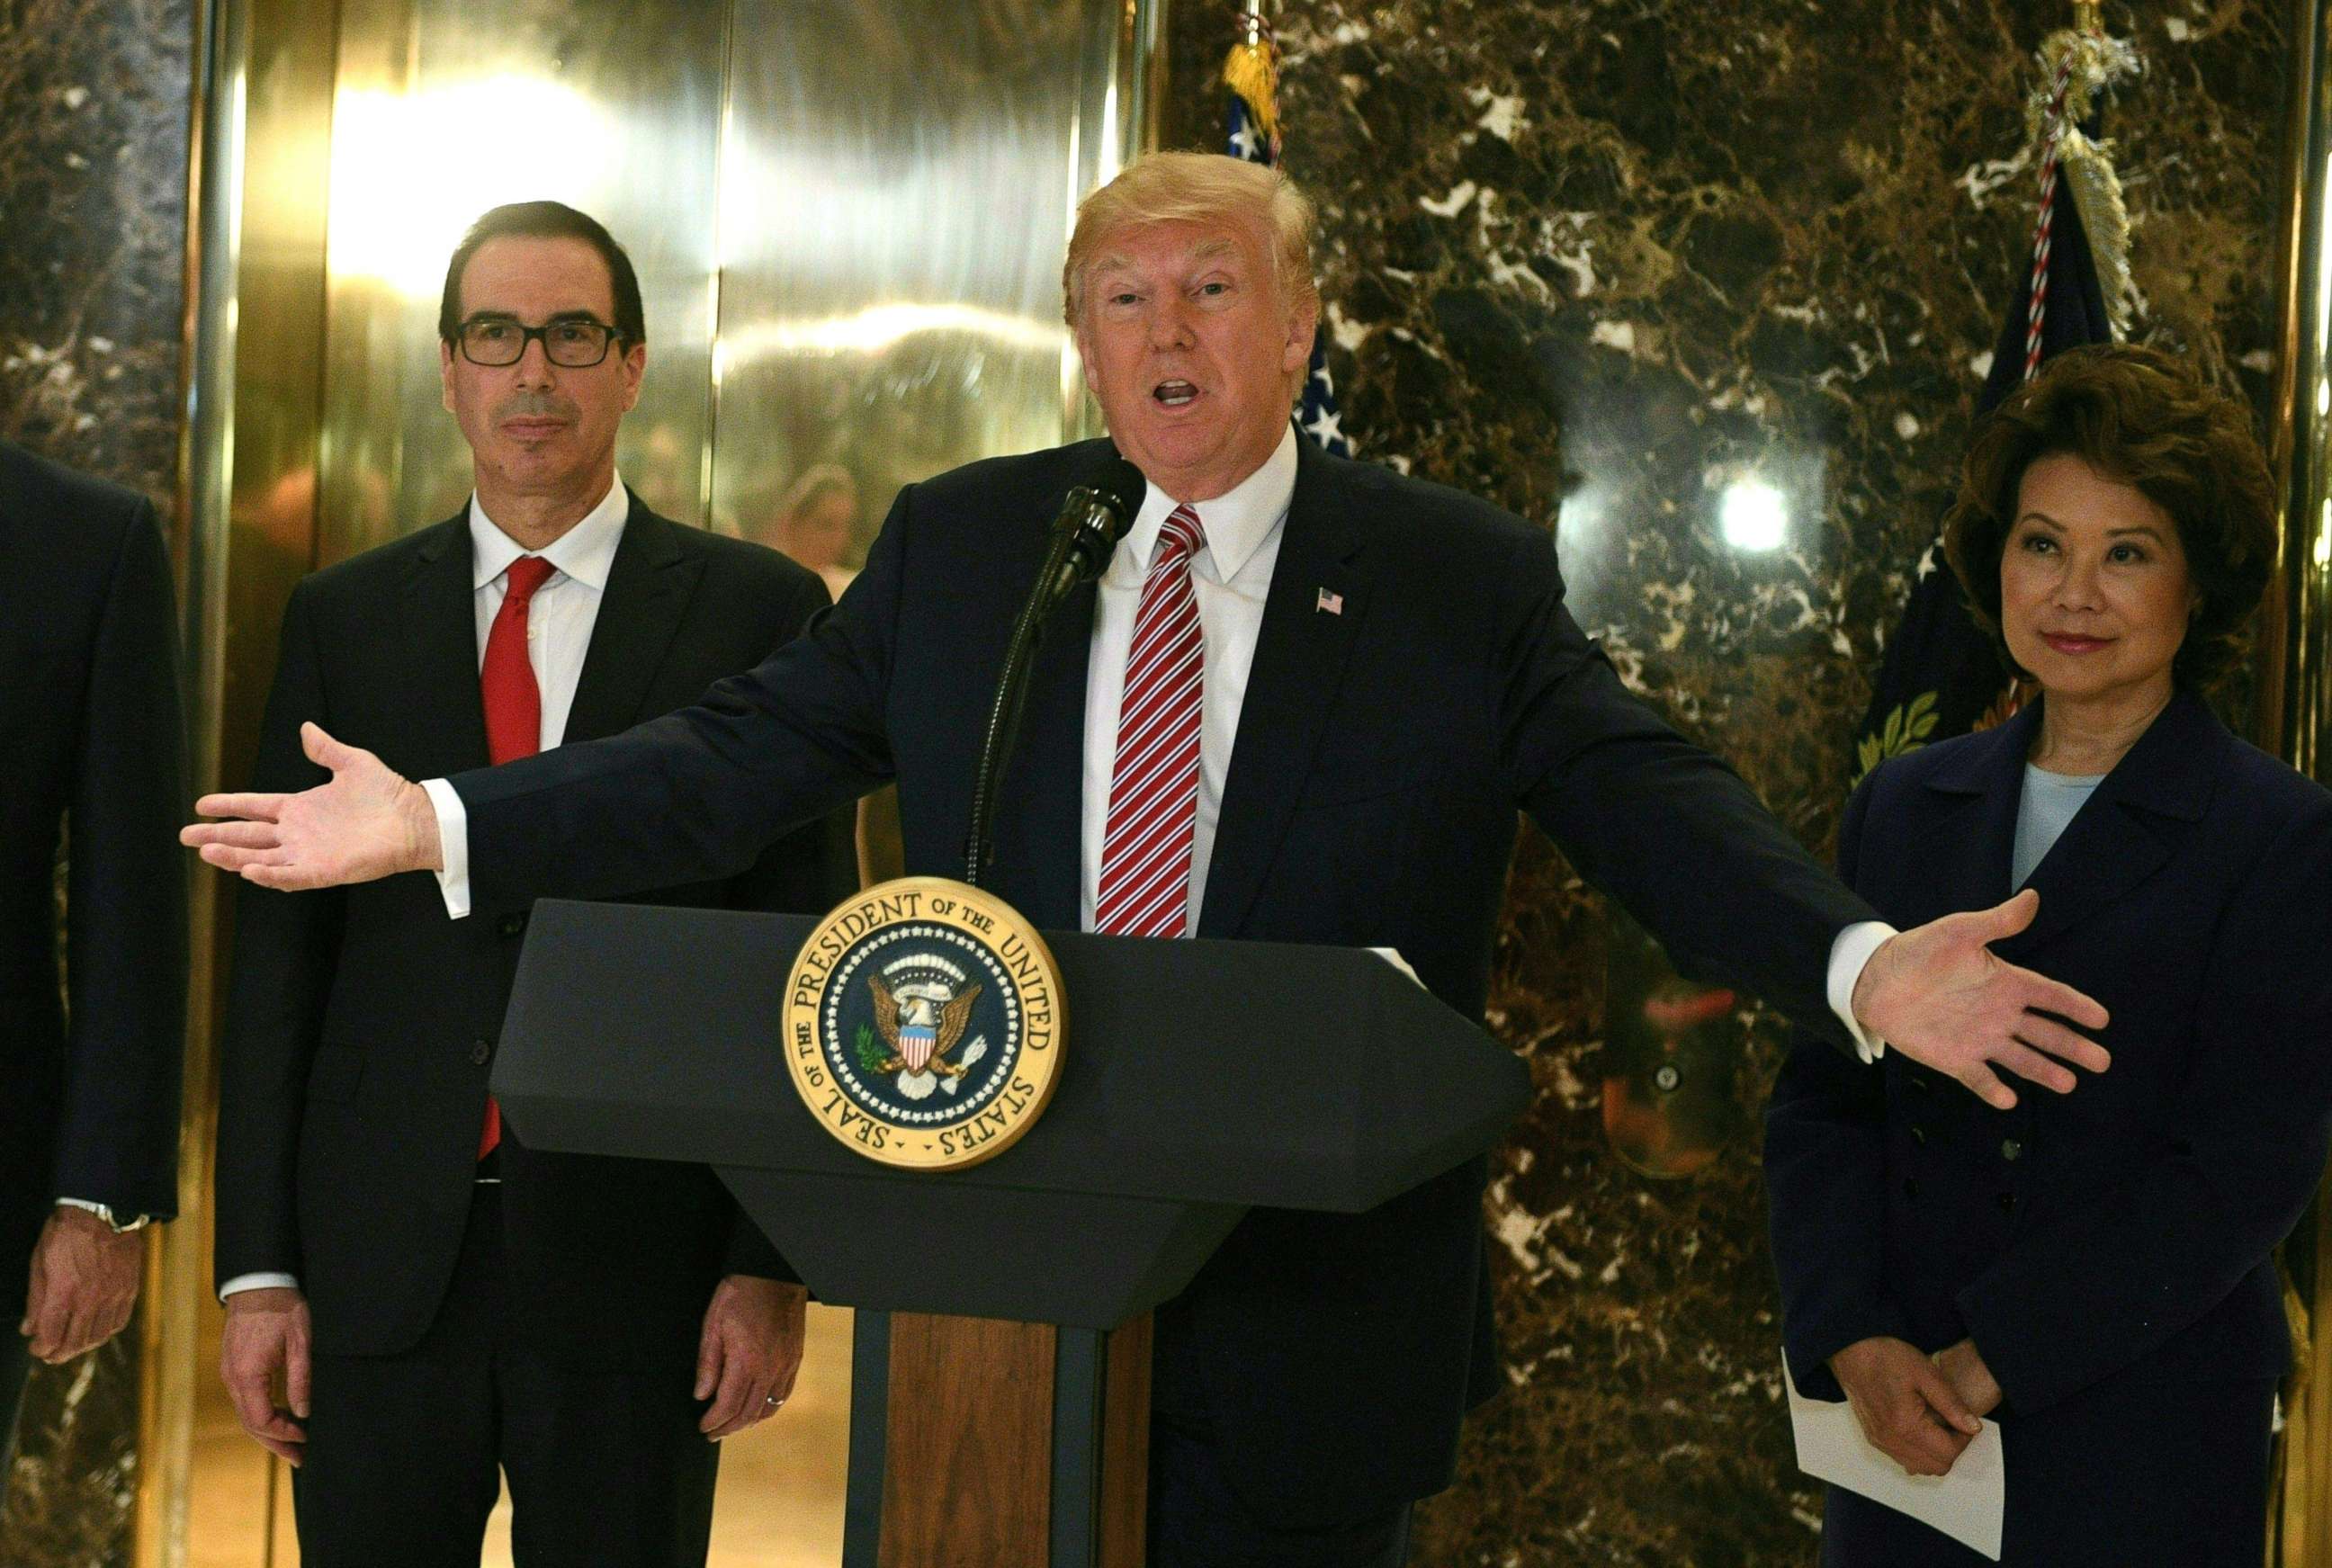 PHOTO: President Donald Trump speaks to the press about protests in Charlottesville, V.A., in the lobby at Trump Tower in New York on August 15, 2017.